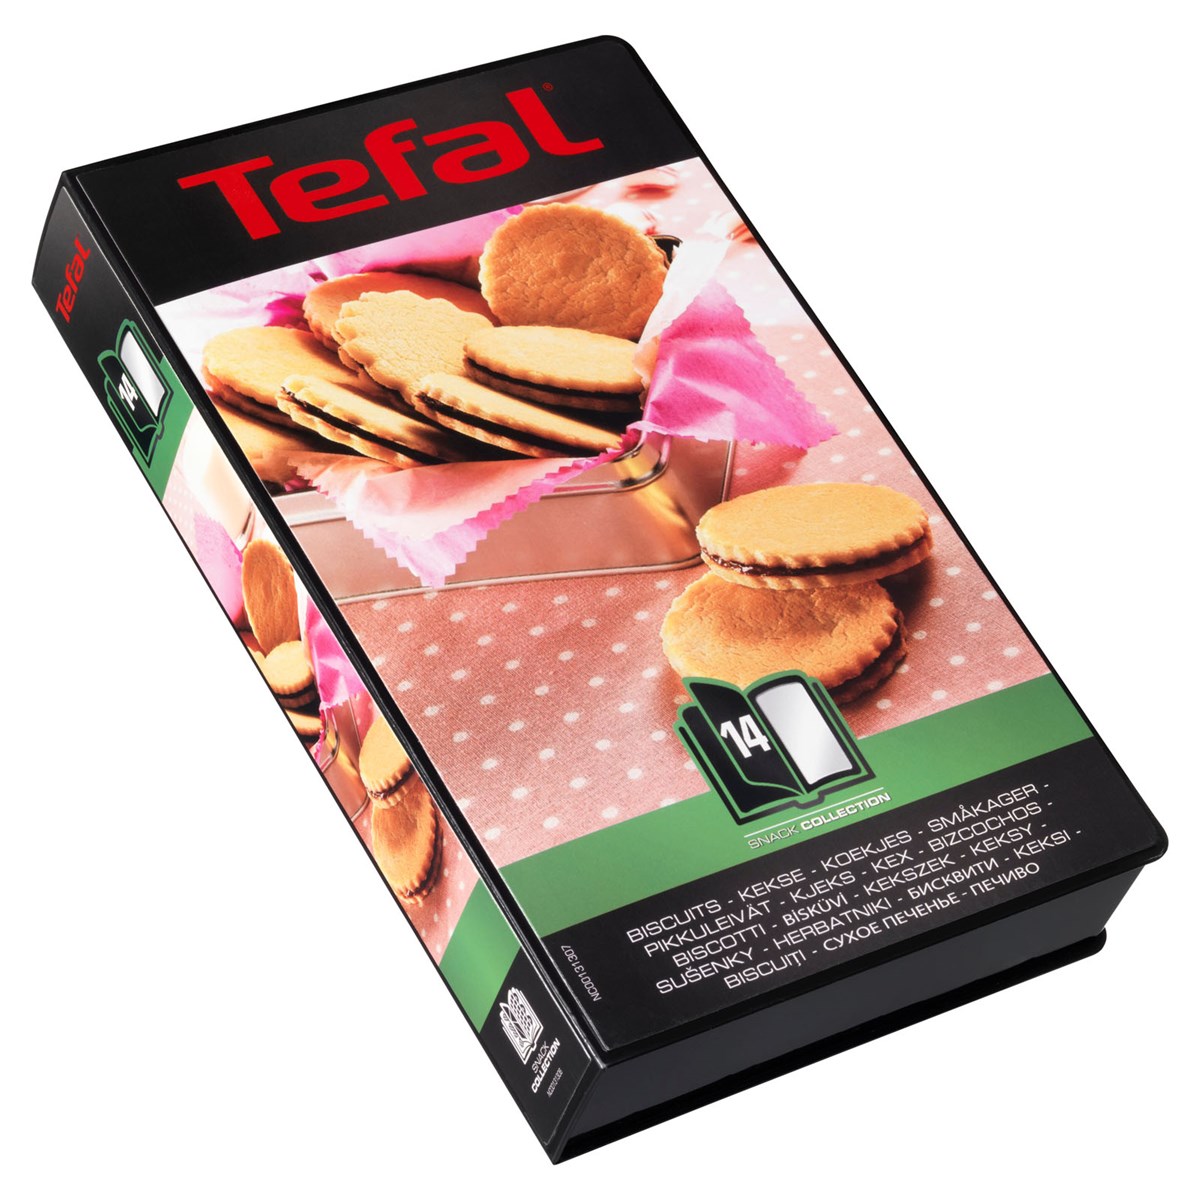 TEFAL, Box 14: Biscuits